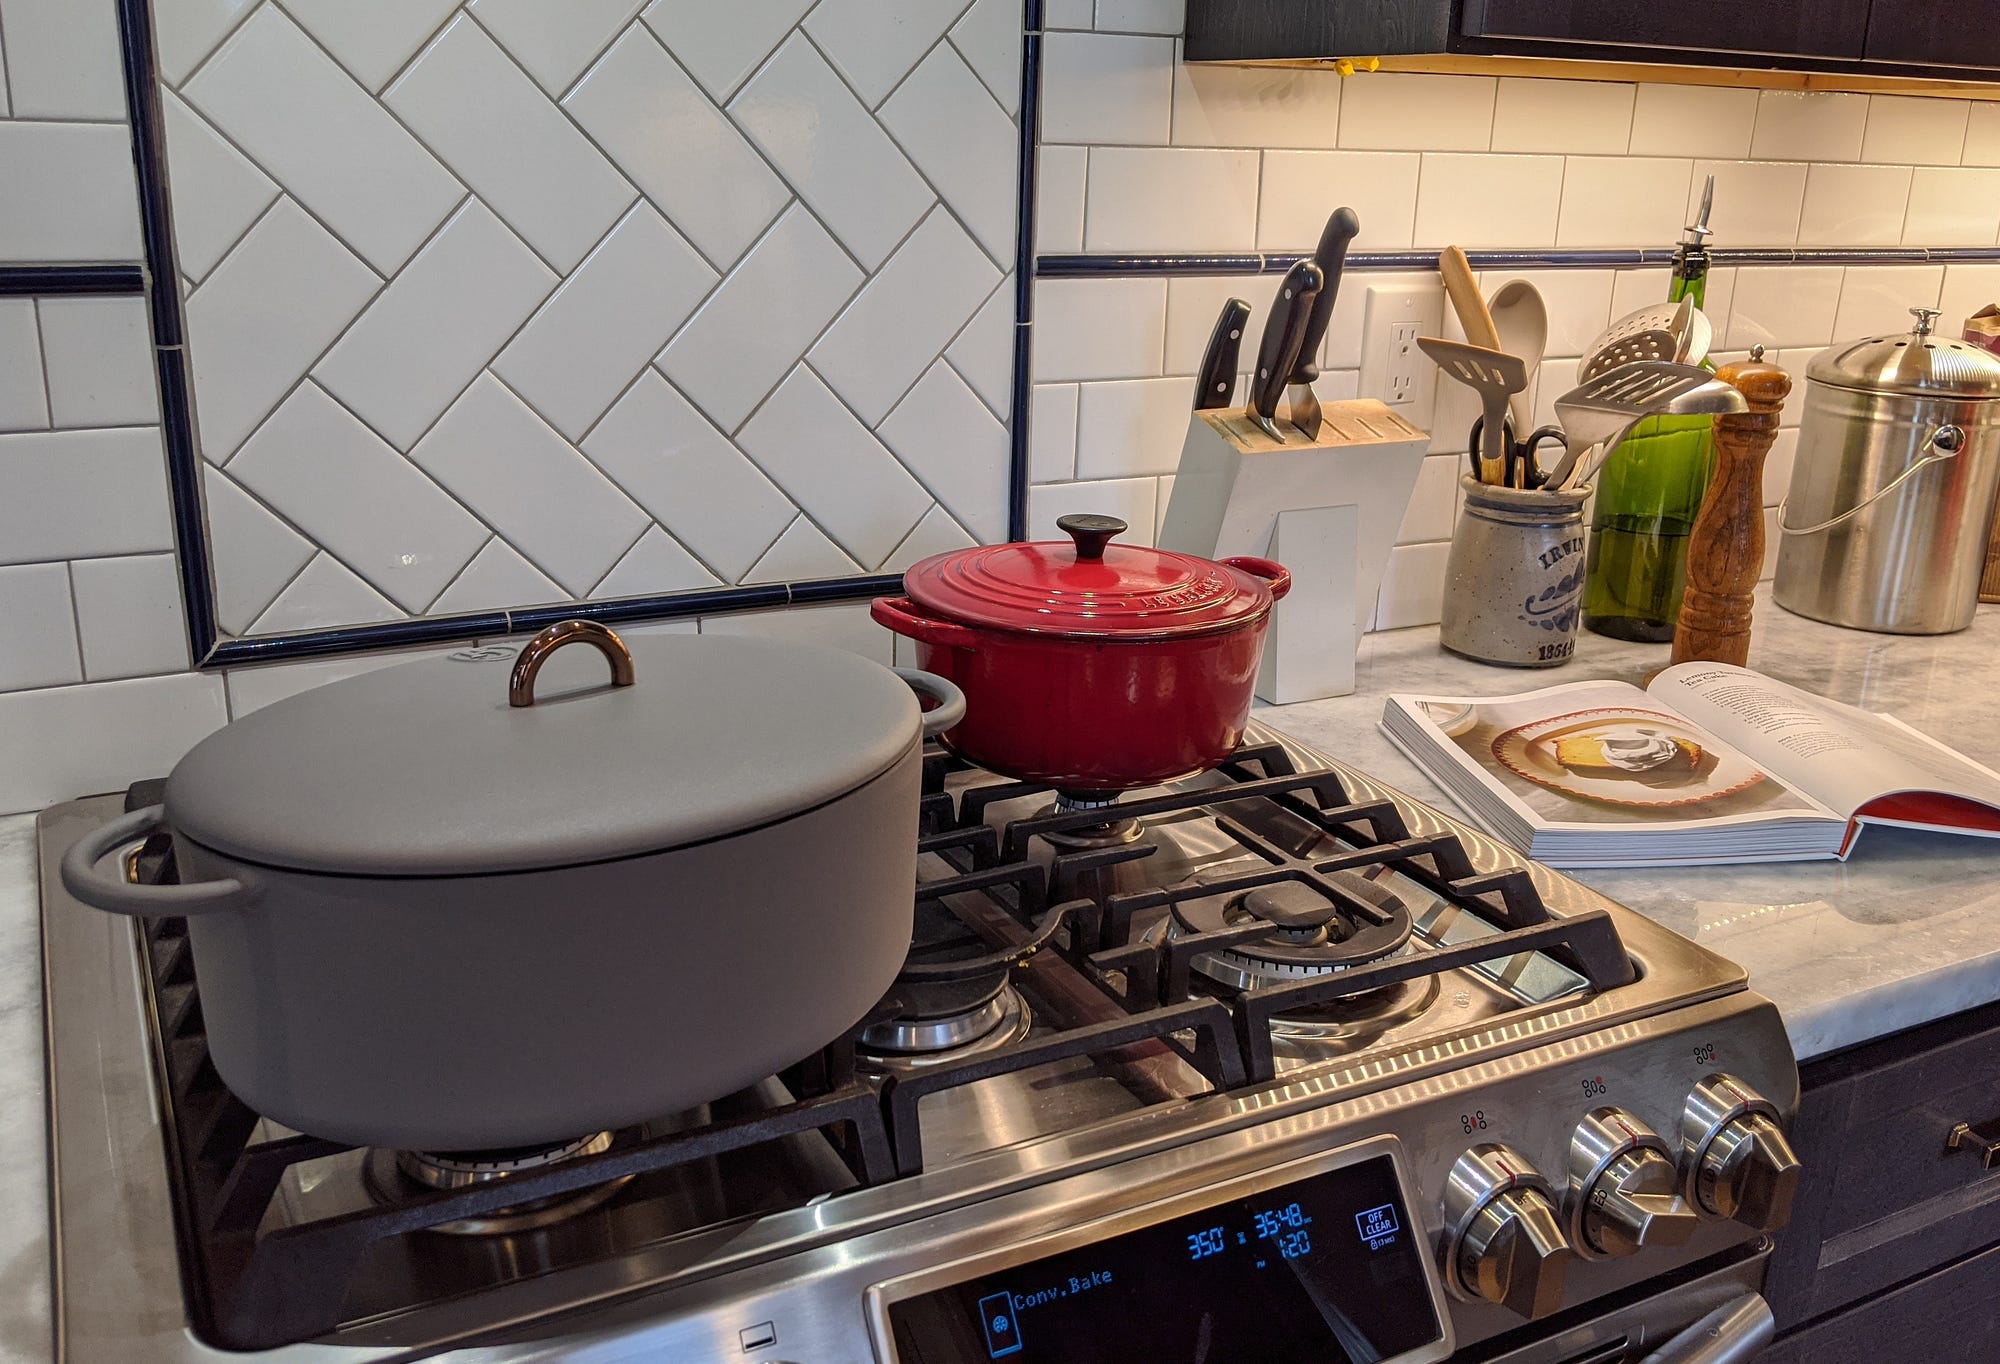 Great Jones Cookware Will Make You Fall in Love with Cooking